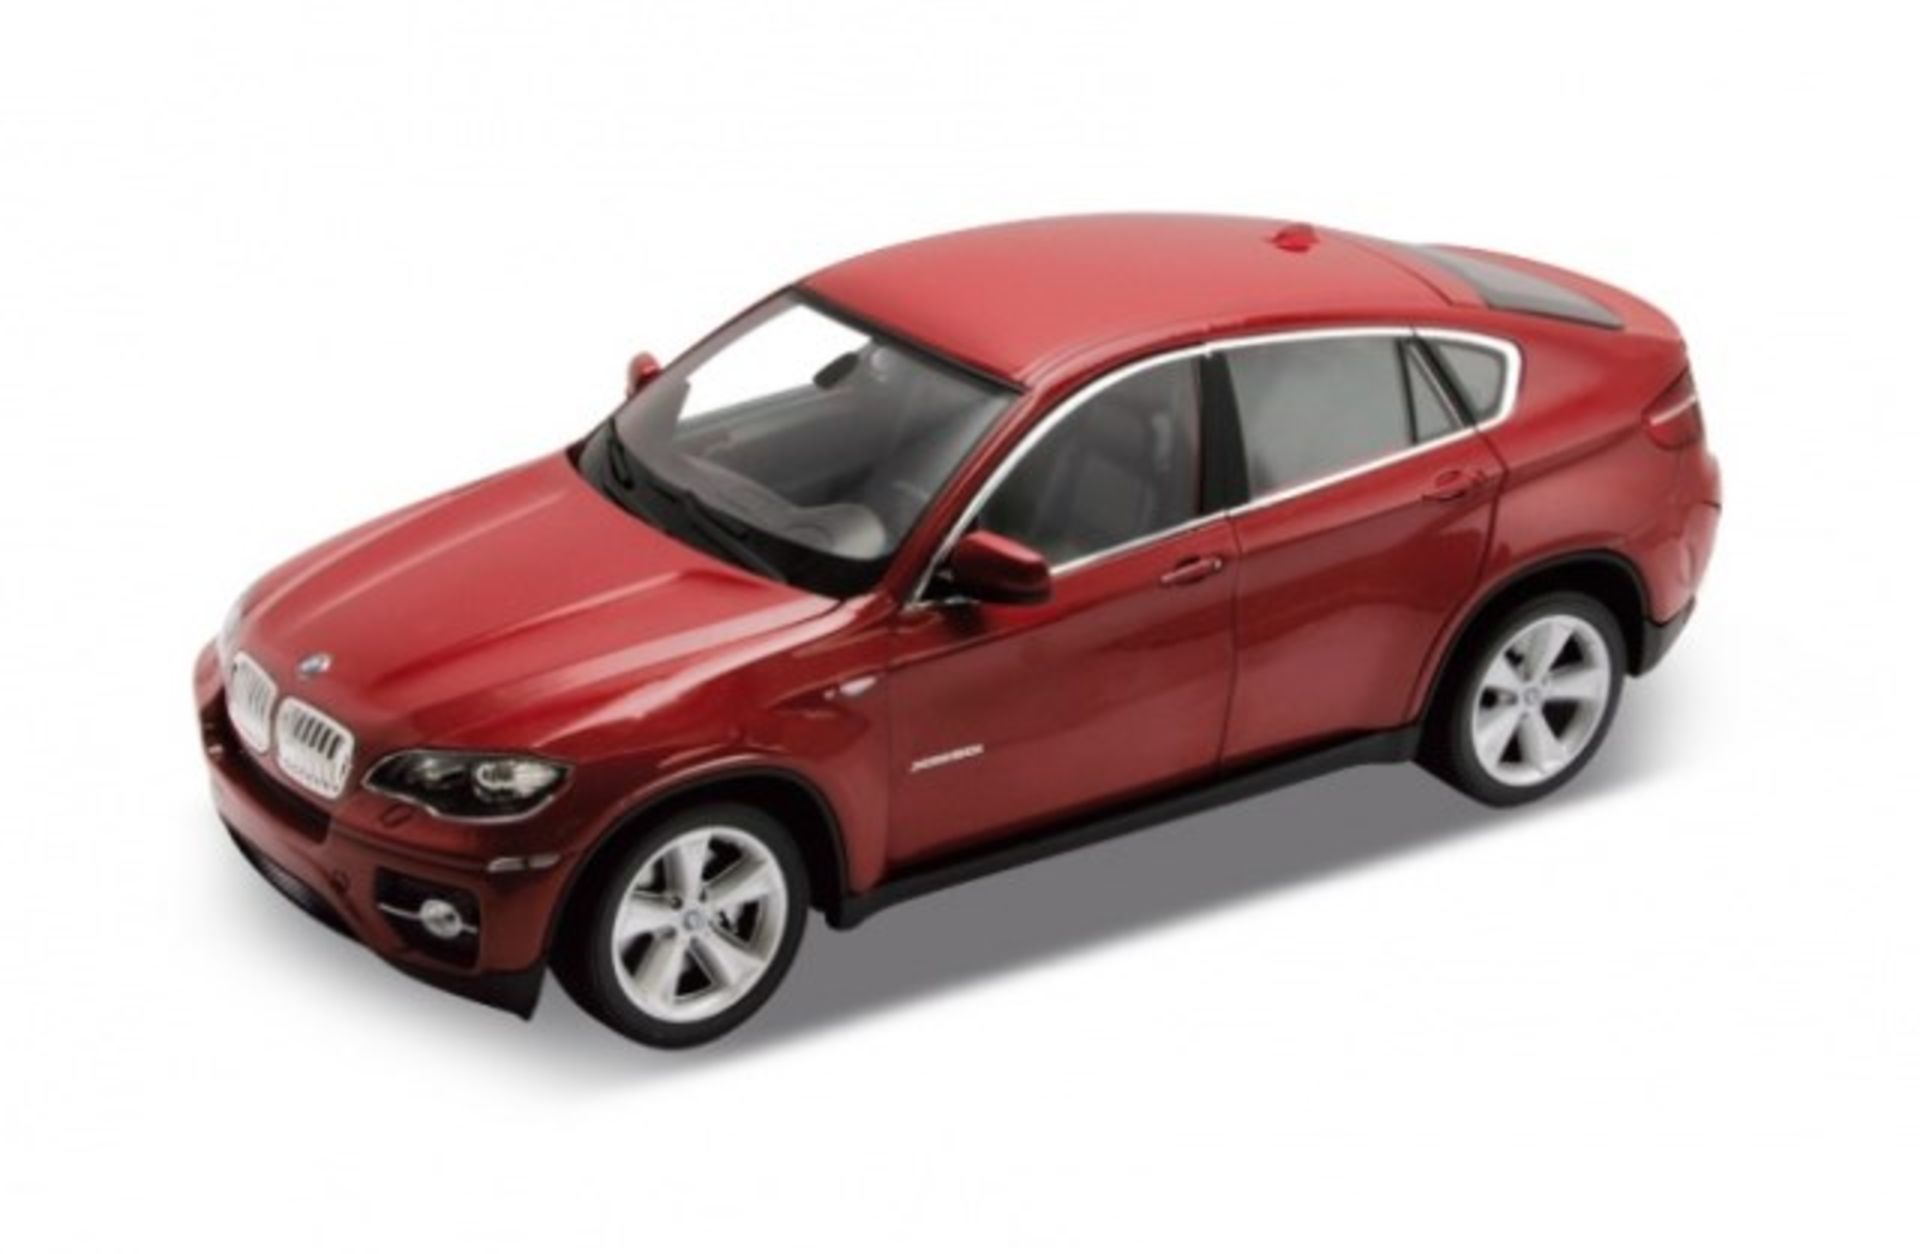 V *TRADE QTY* Brand New 1:24 Scale RC BMW X6 Full Function Radio Control Car - Official